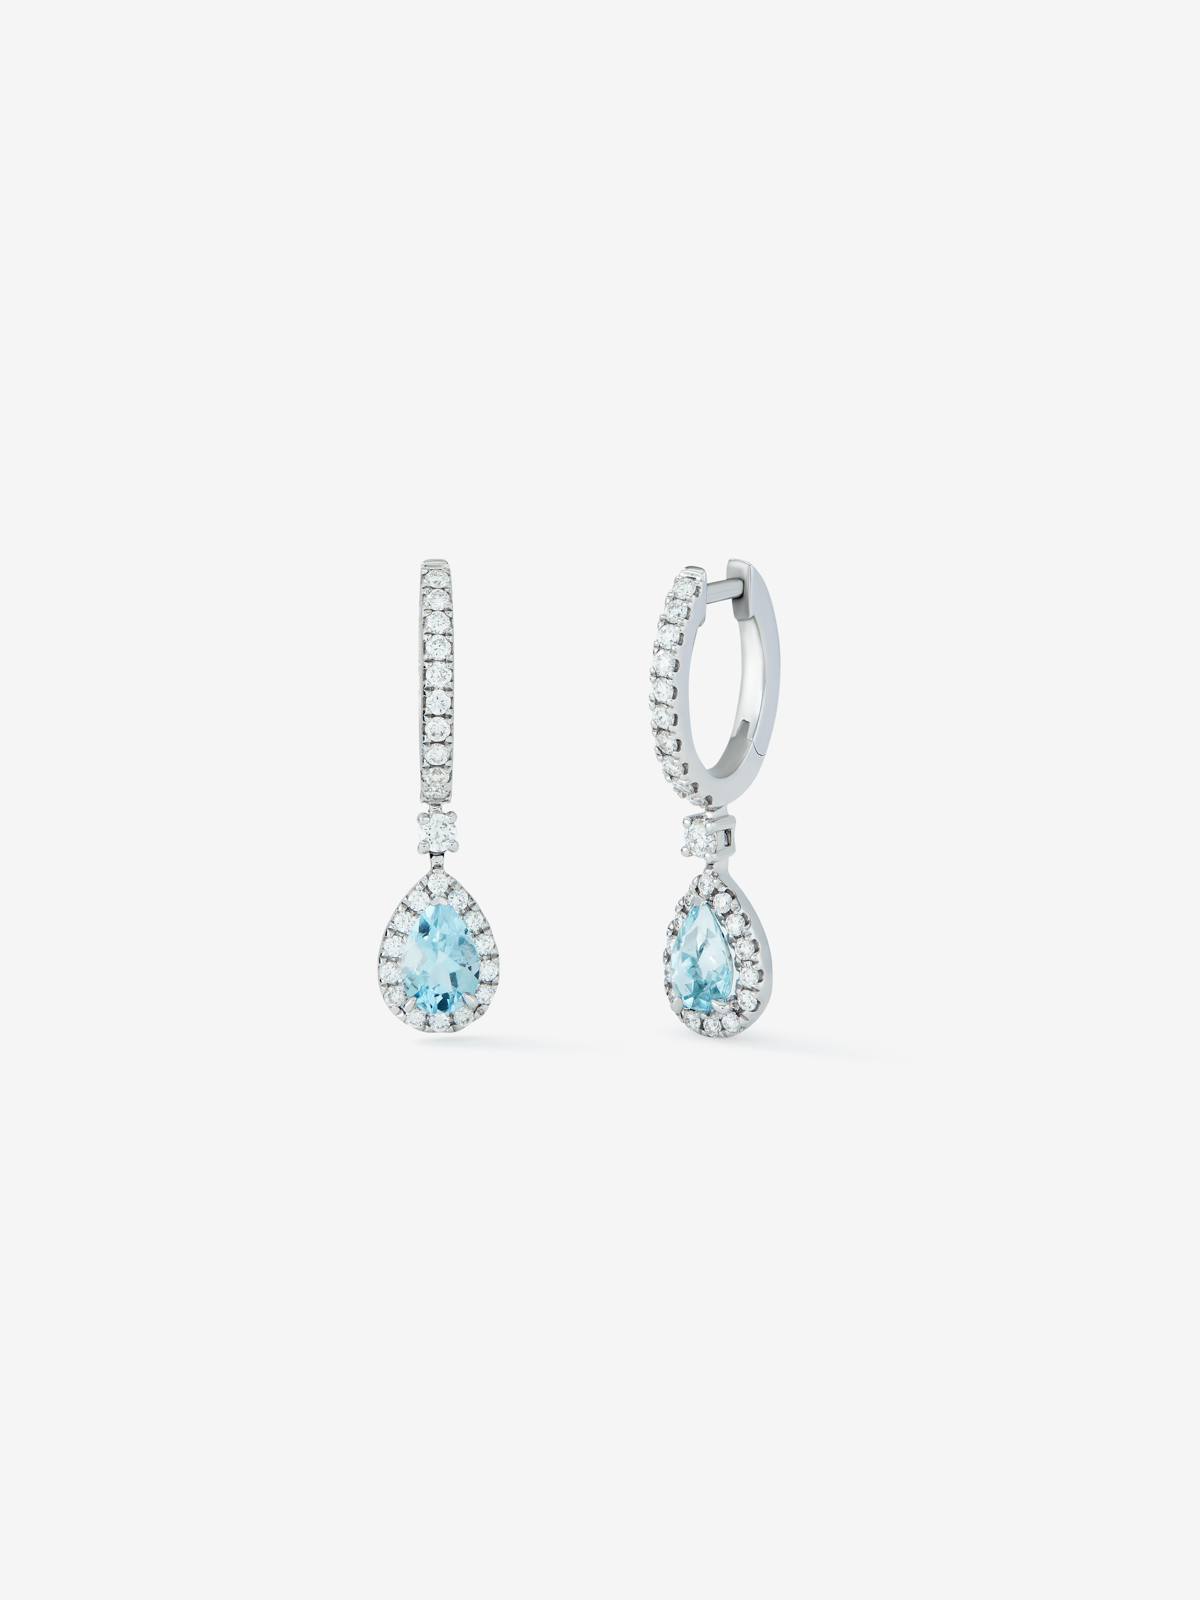 18K white gold earrings with blue aquamarines in 0.43 cts and white diamonds in bright size